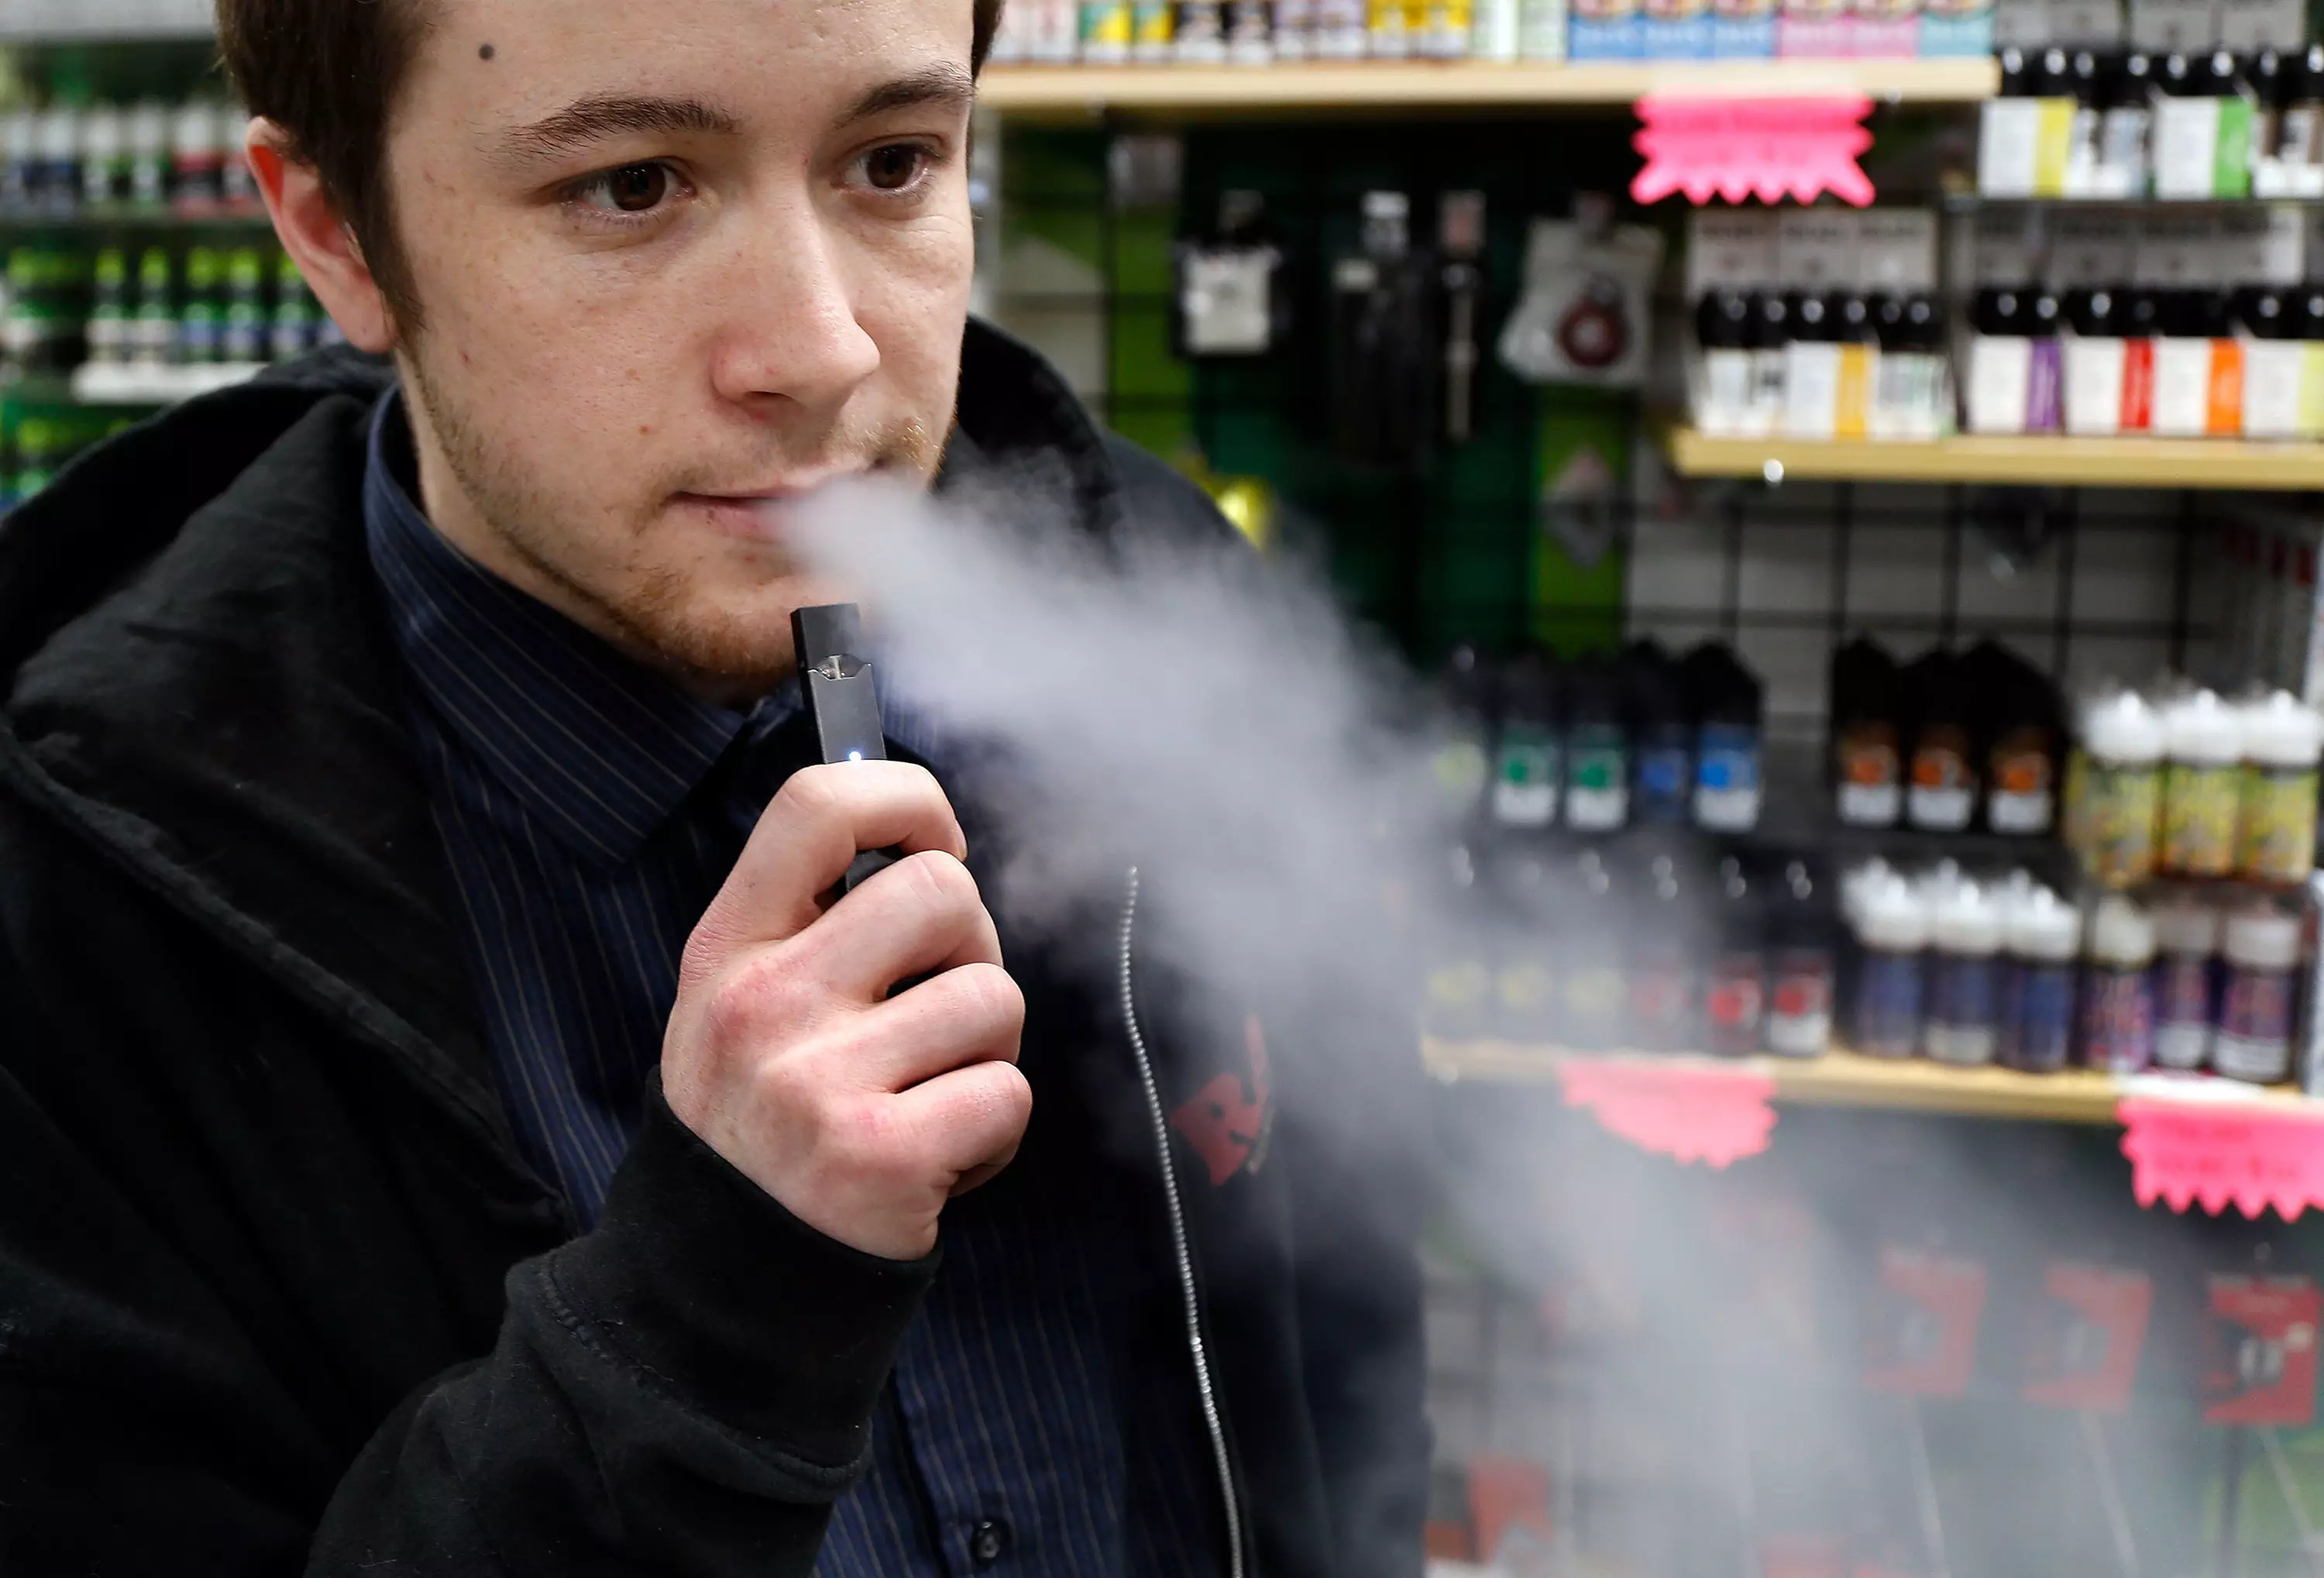 The study claims vaping could raise people's risk of suffering a stroke by 71 percent.